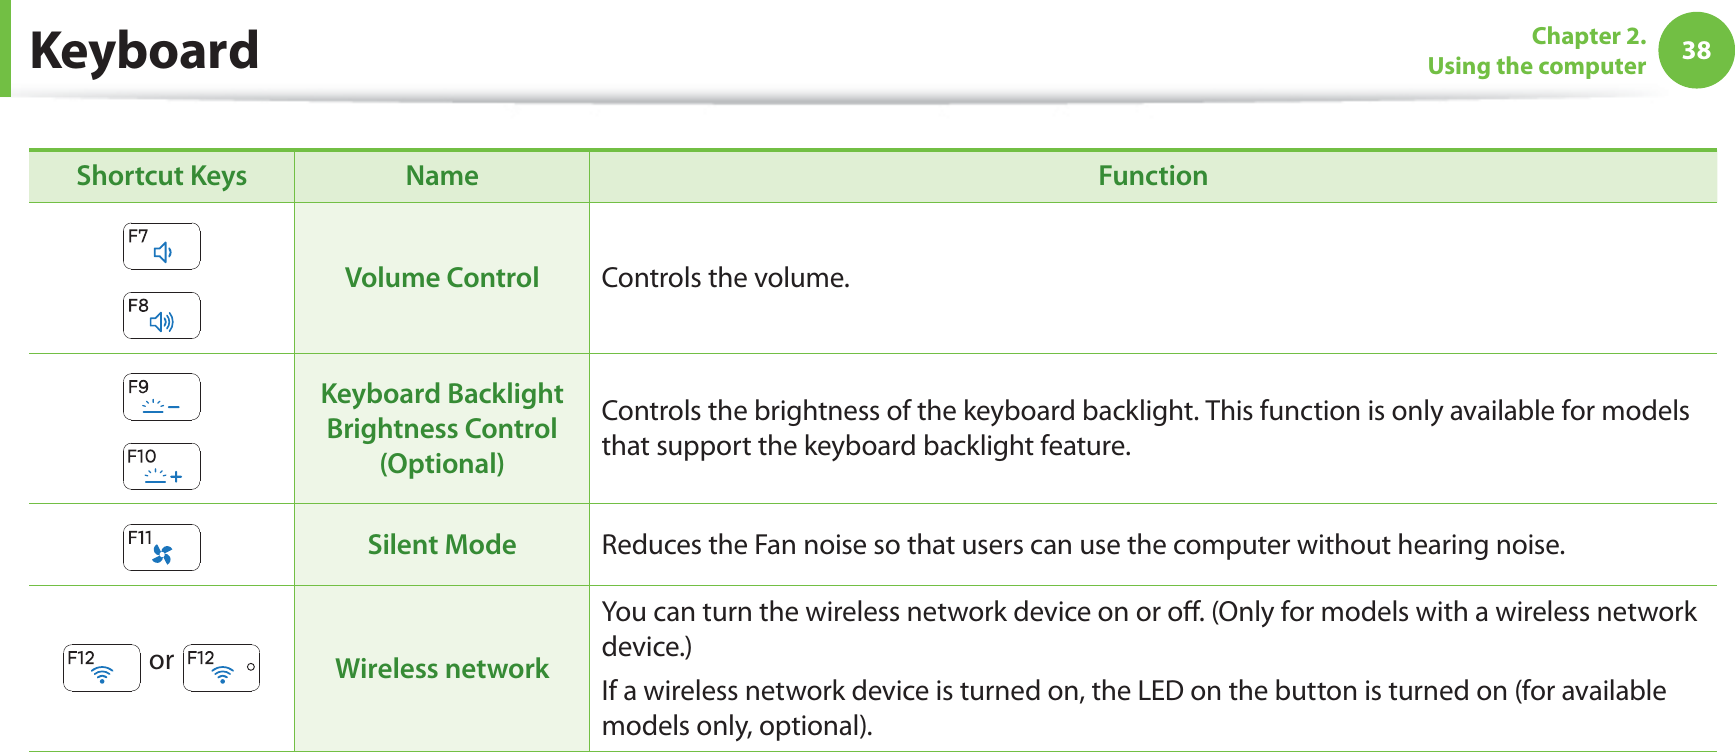 38Chapter 2.  Using the computerShortcut Keys Name FunctionVolume Control Controls the volume.Keyboard Backlight Brightness Control (Optional)Controls the brightness of the keyboard backlight. This function is only available for models that support the keyboard backlight feature.Silent Mode Reduces the Fan noise so that users can use the computer without hearing noise.  or  Wireless networkYou can turn the wireless network device on or o. (Only for models with a wireless network device.) If a wireless network device is turned on, the LED on the button is turned on (for available models only, optional).Keyboard